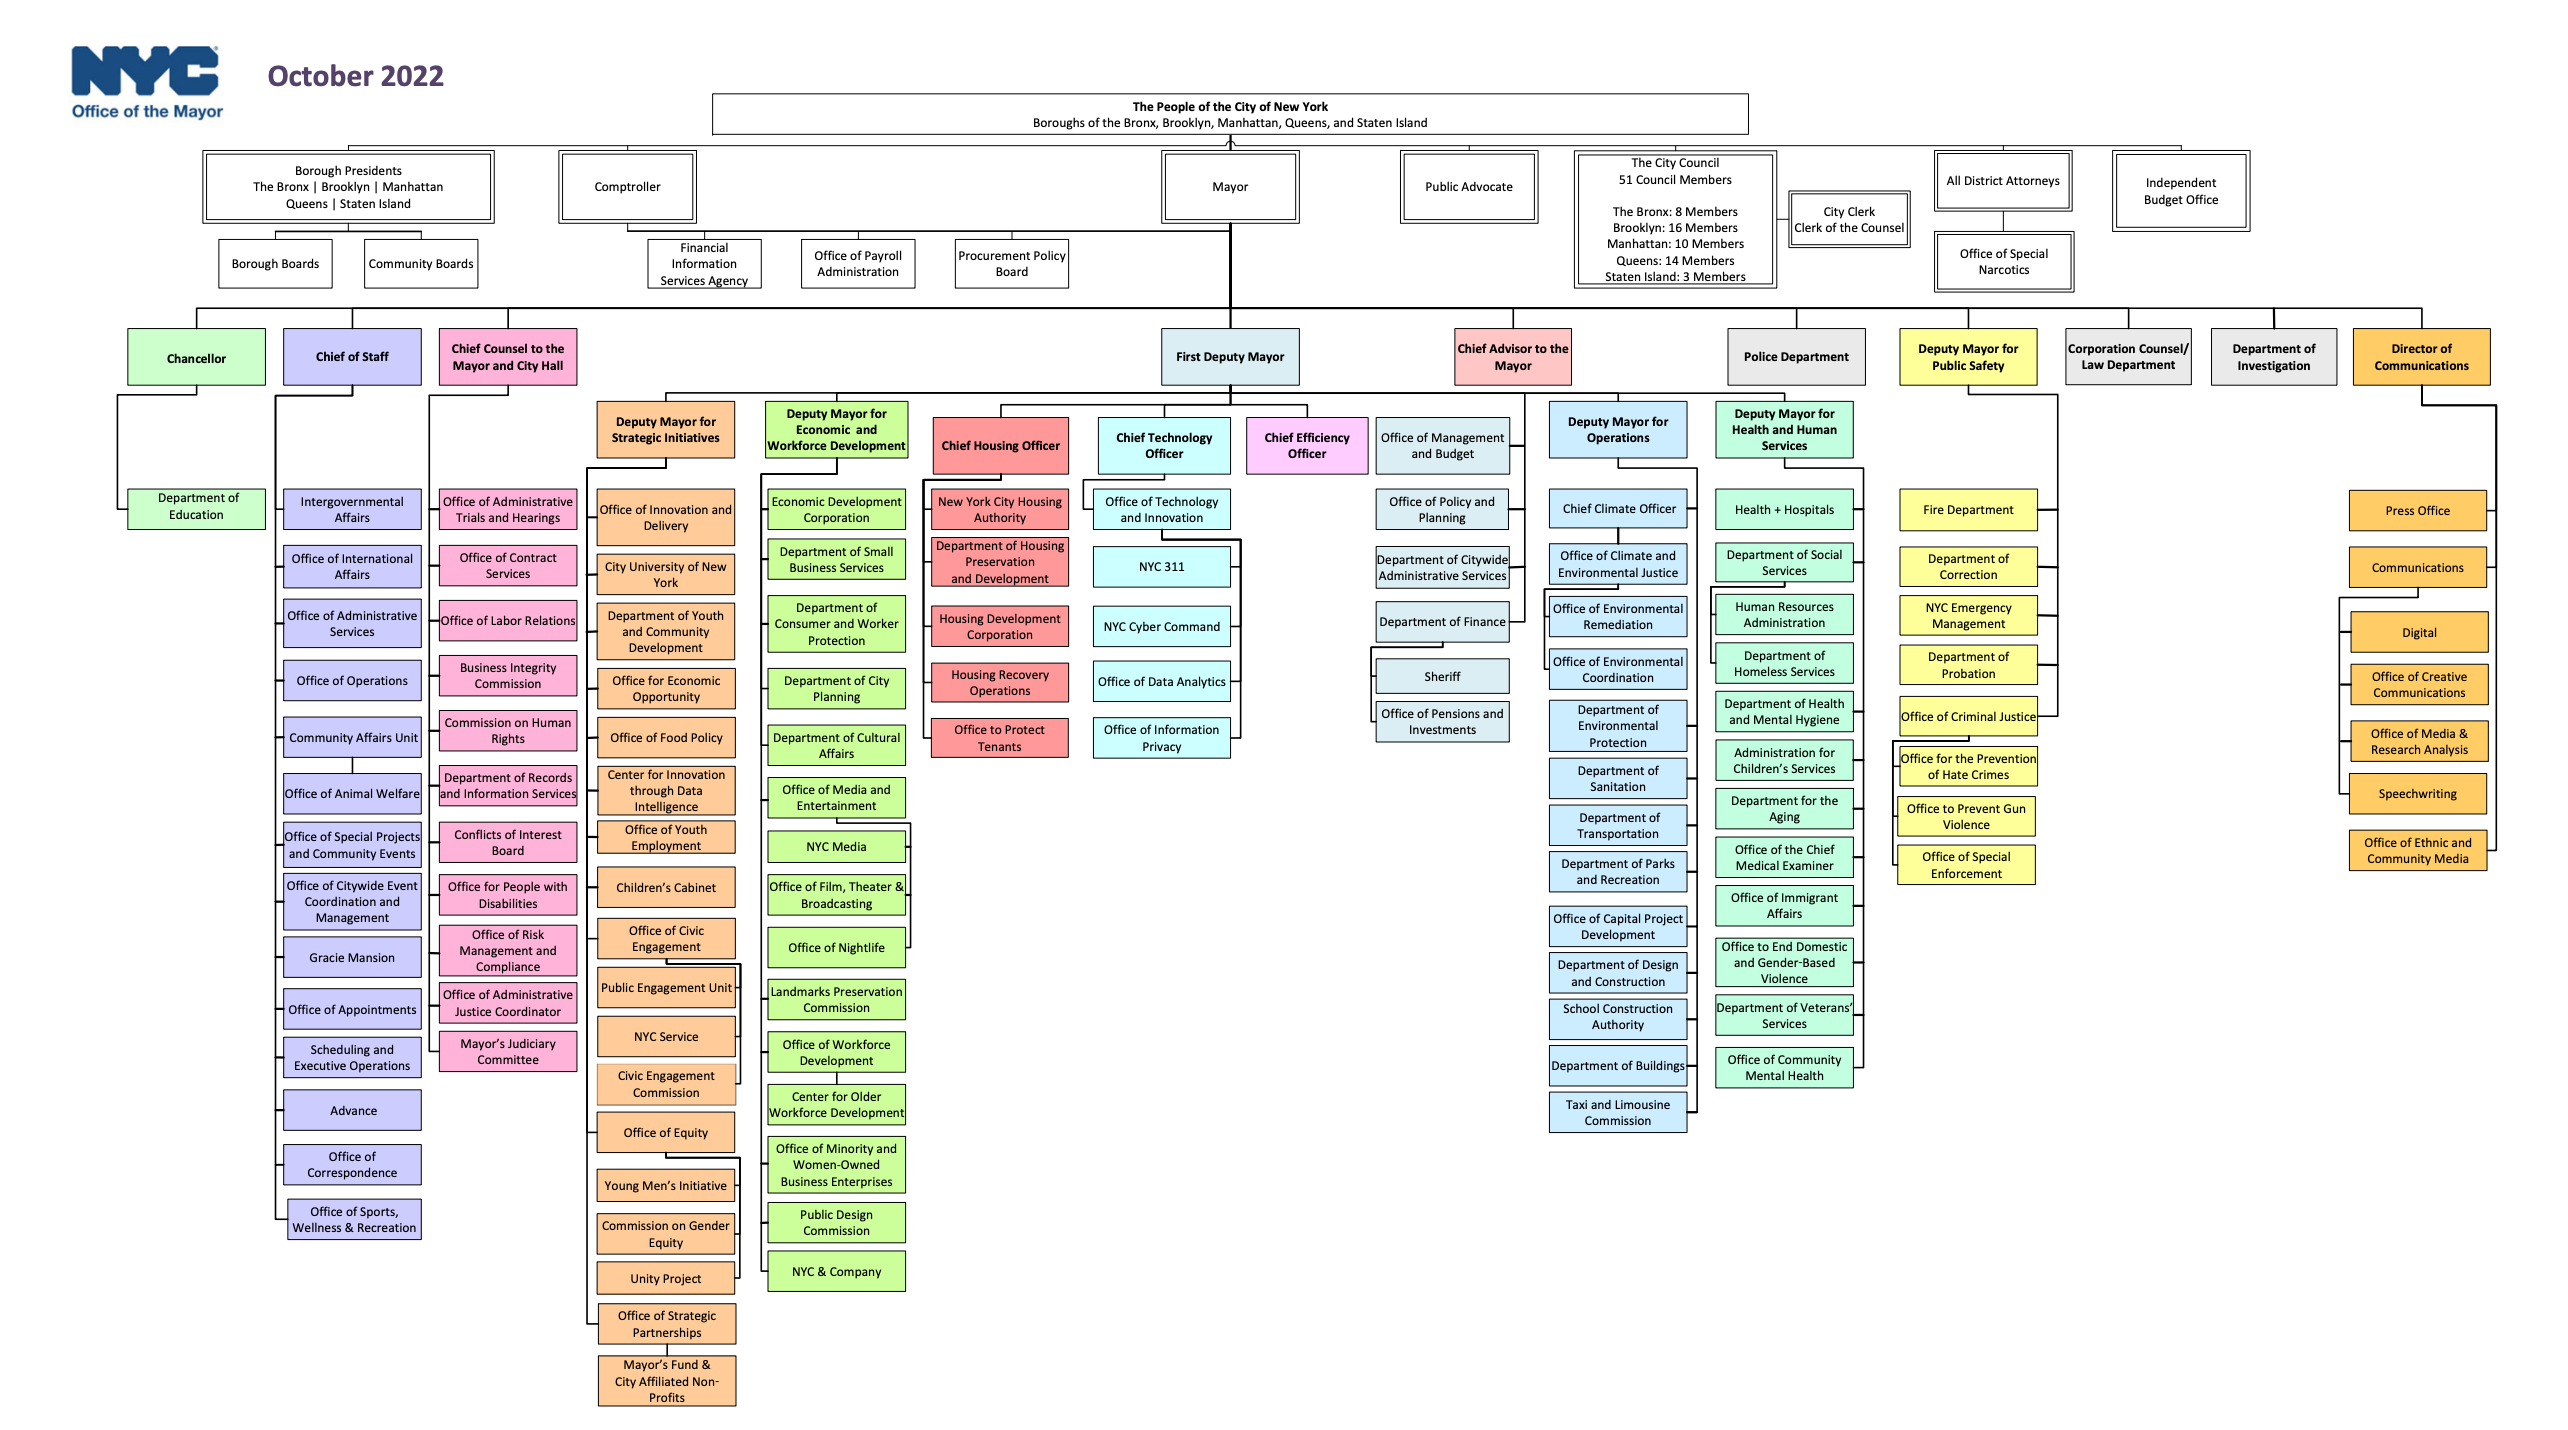 Org Chart of NYC government. Taken from NYC government site.